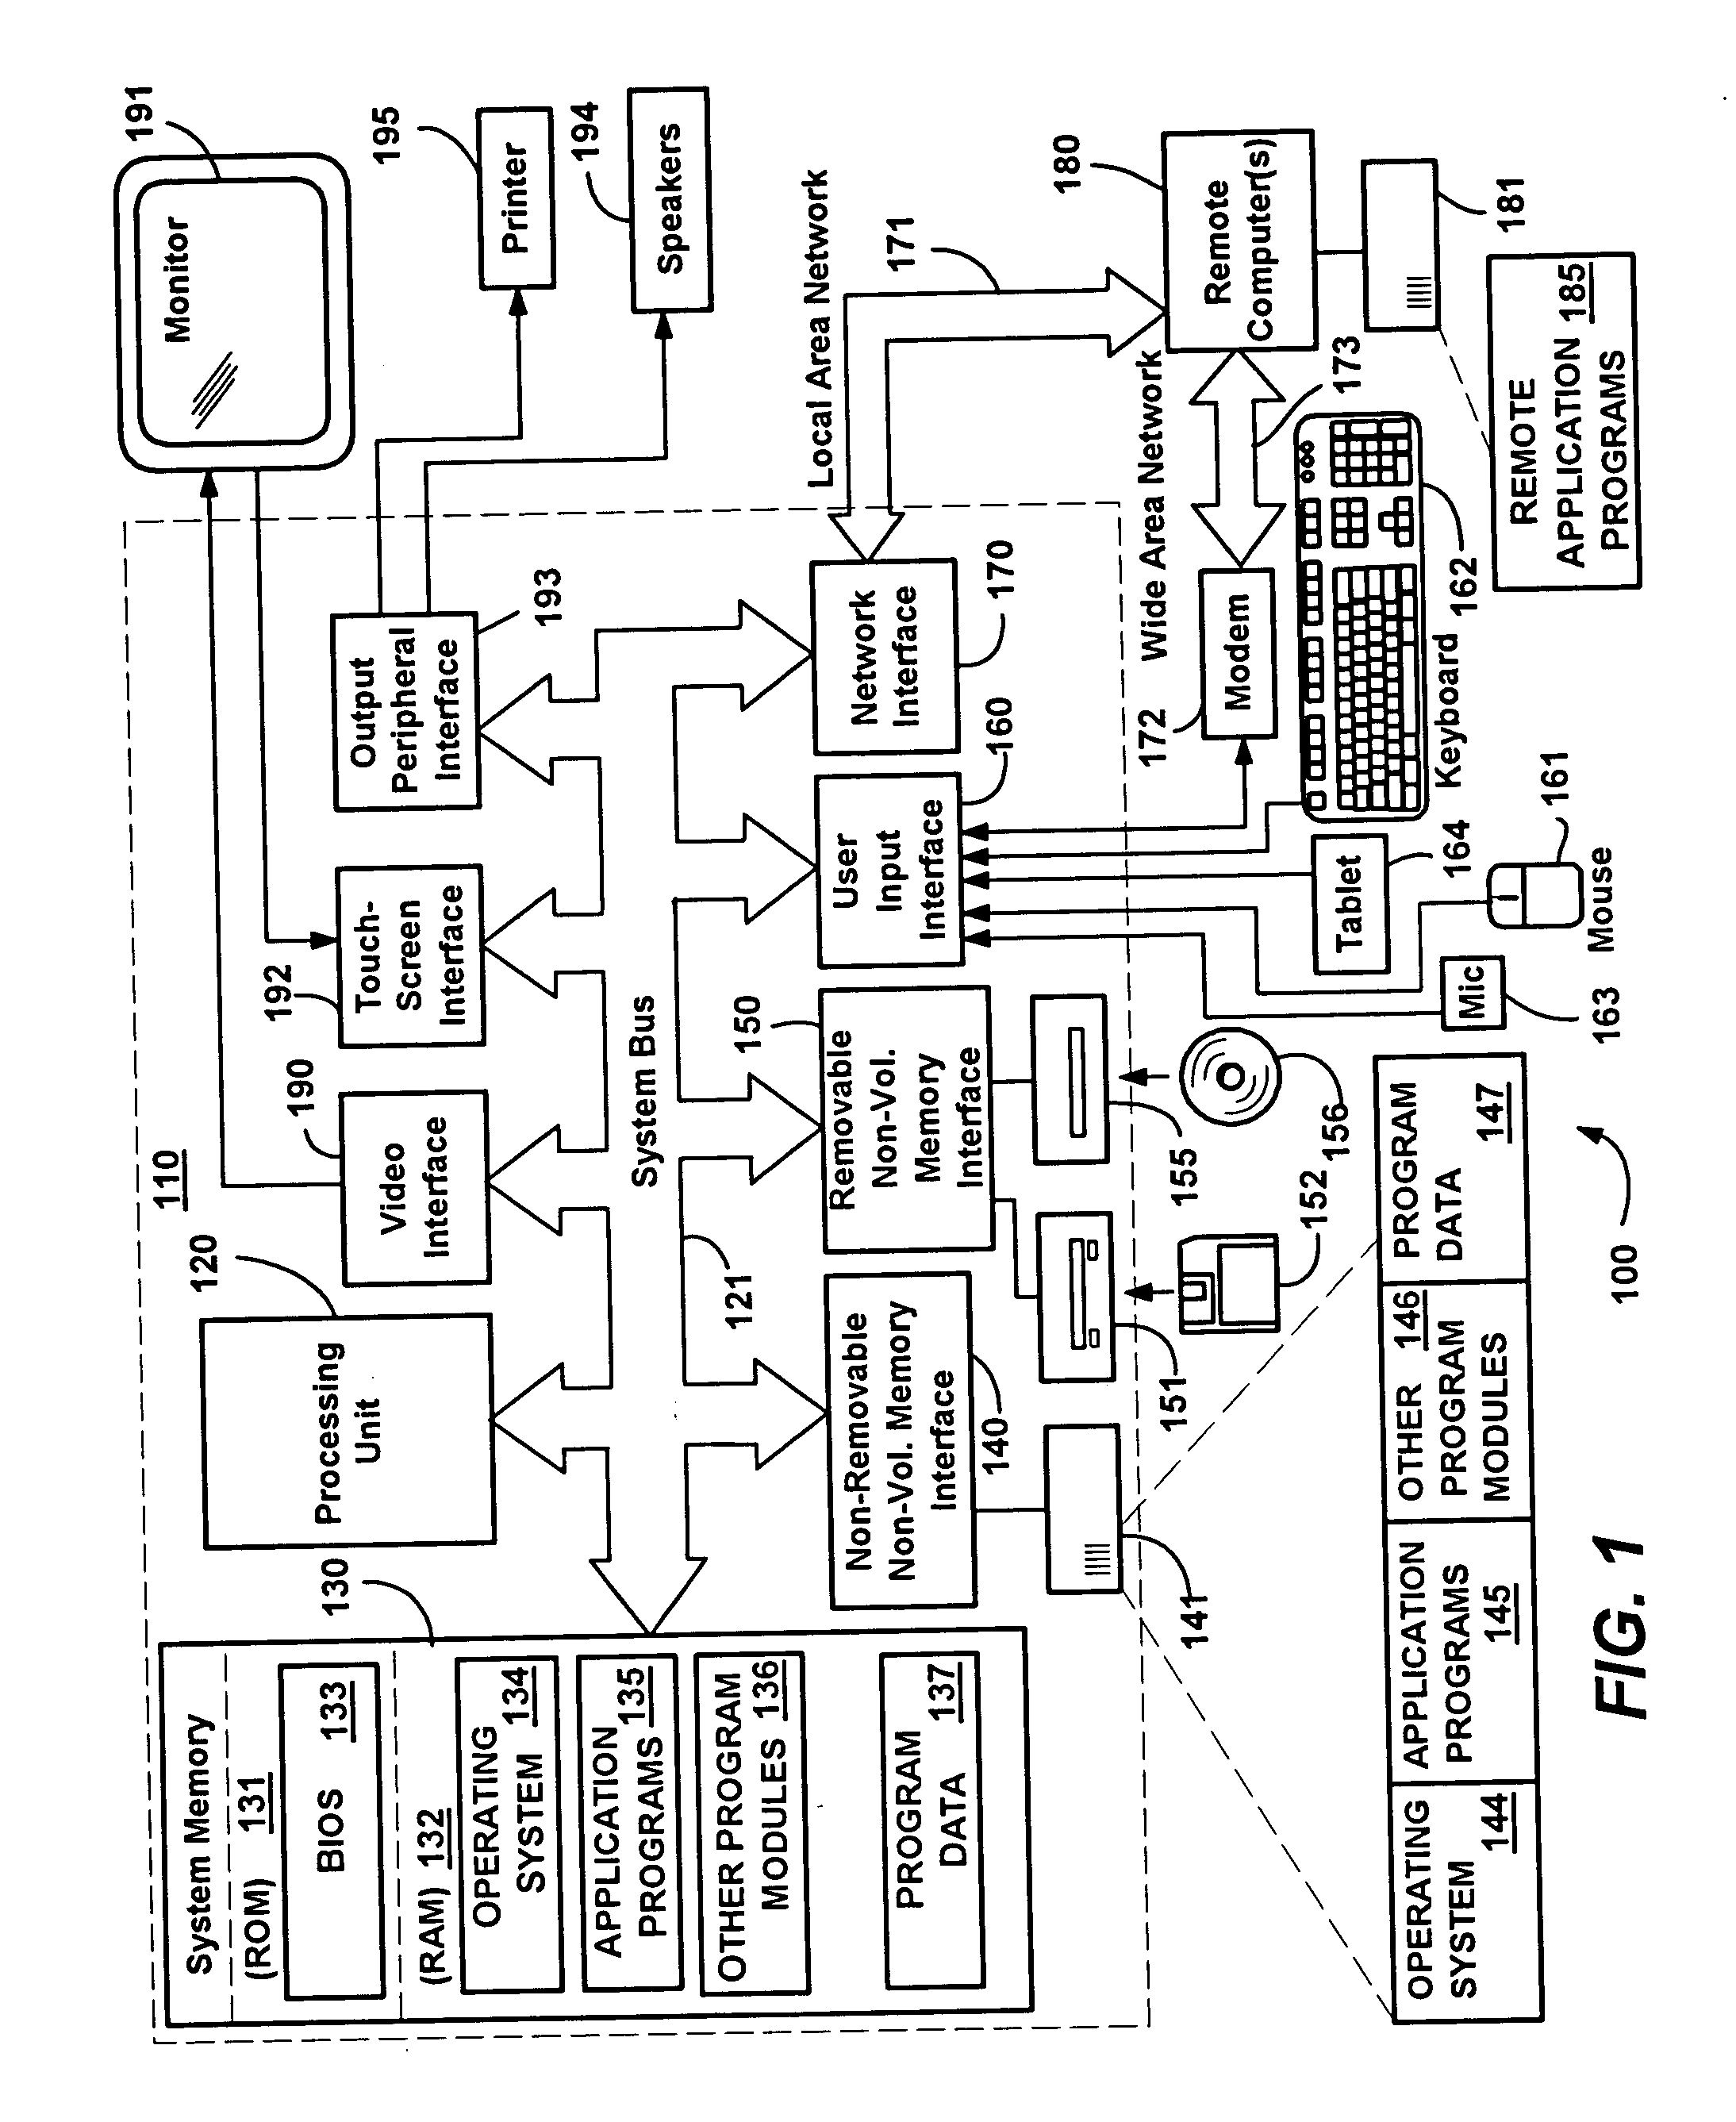 Method and system for automatically testing a software build